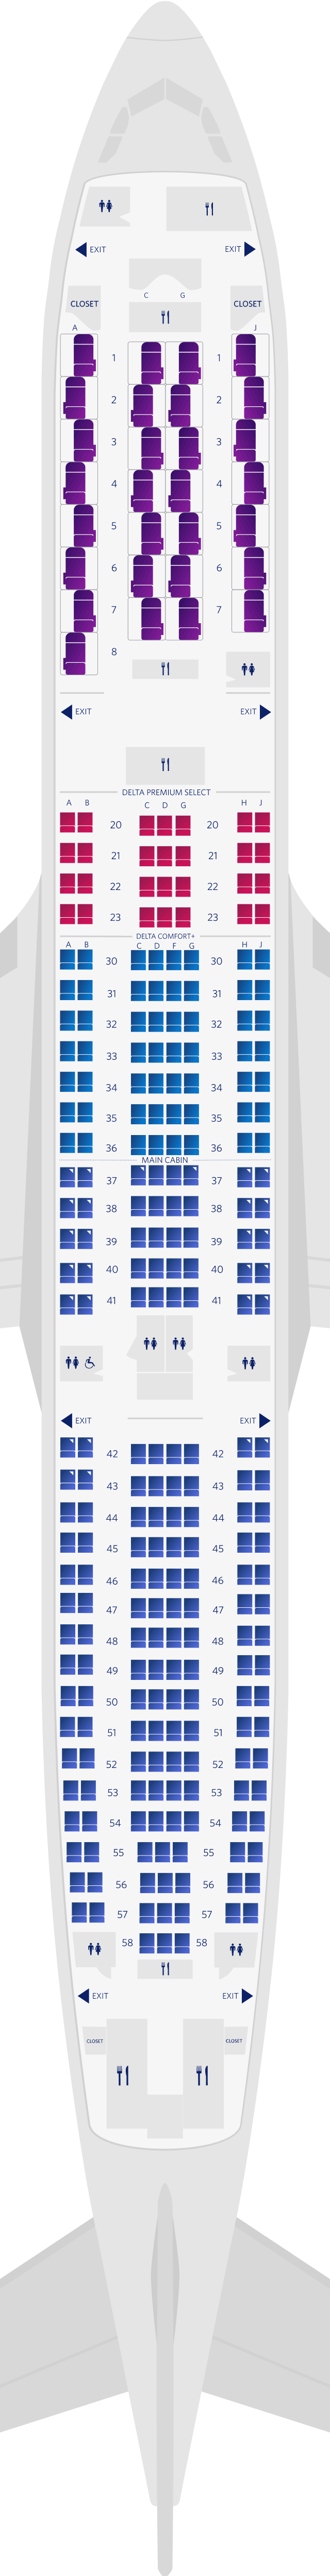 Airbus A330-900neo Seat Map